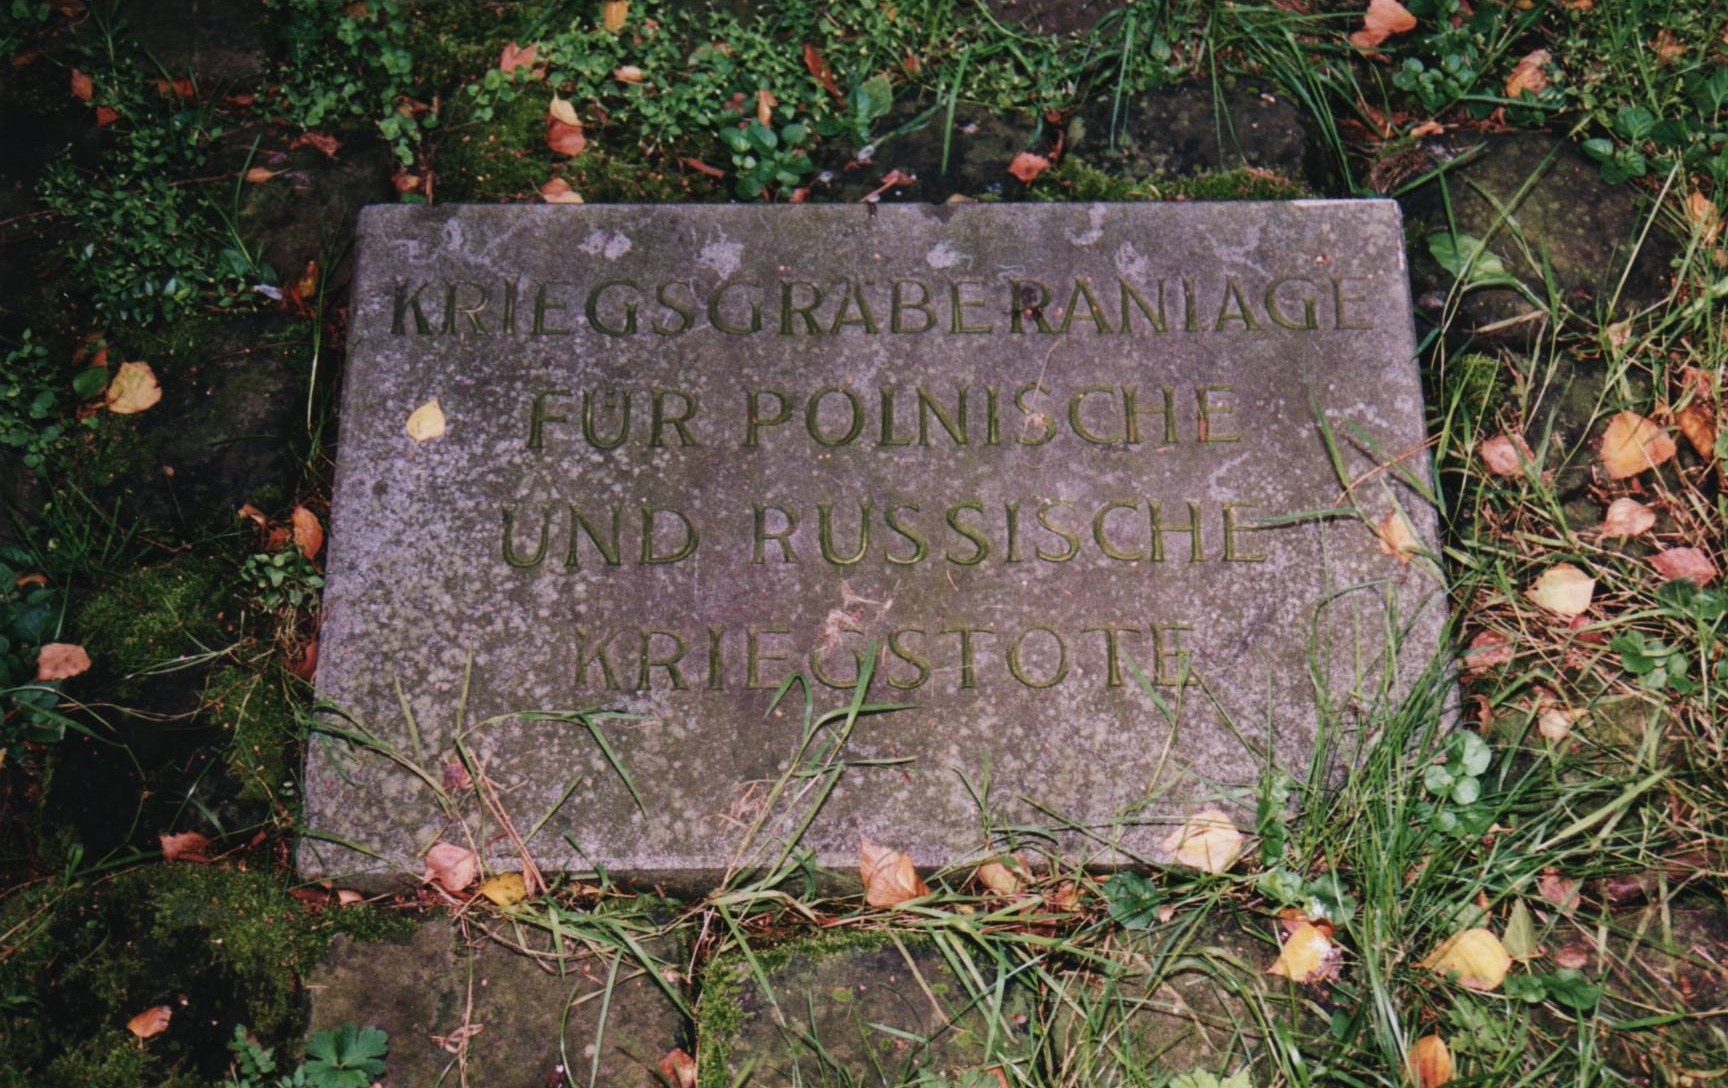 Memorial plaque at the burial ground for Poles and Russians at the cemetary in Paderborn